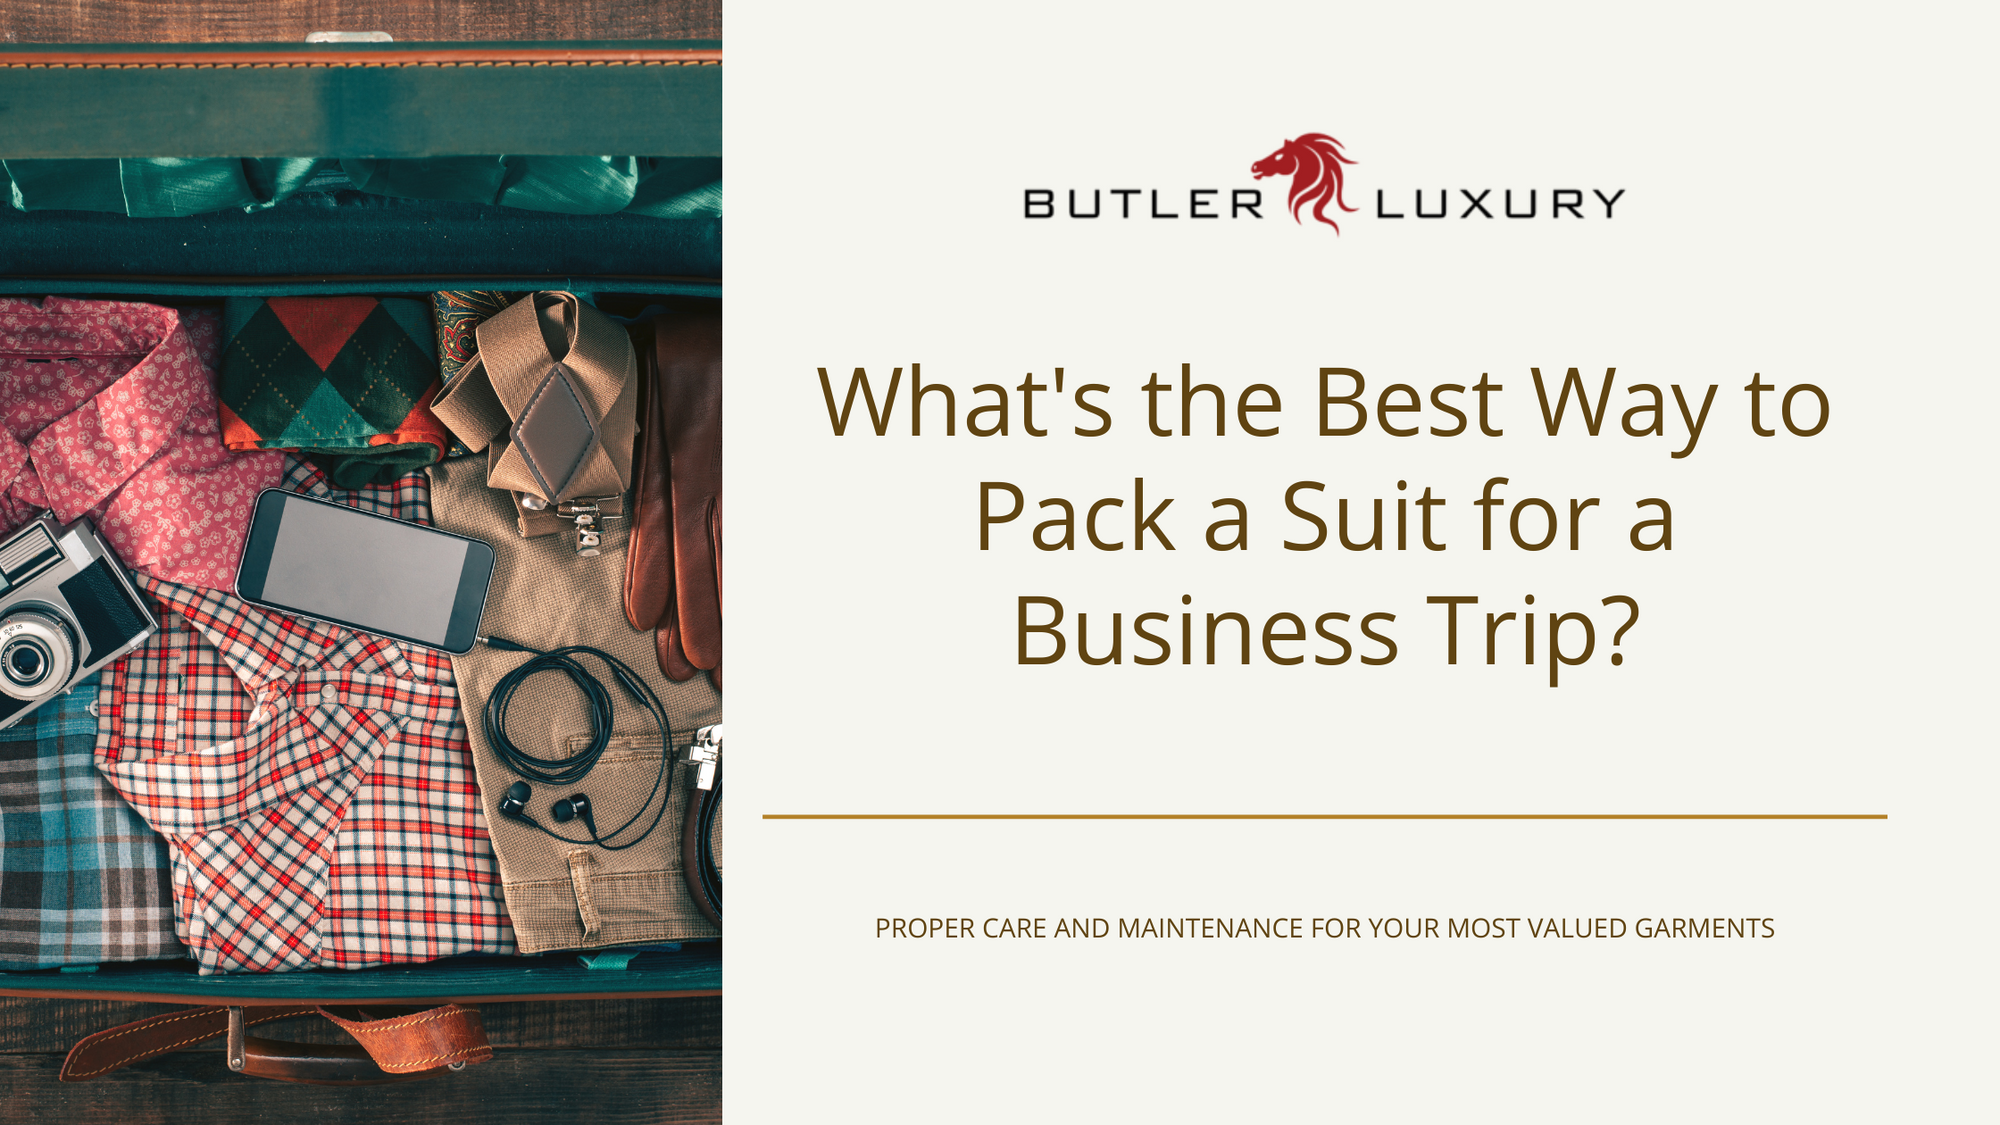 Ask the Butler: What's the Best Way to Pack a Suit for a Business Trip?